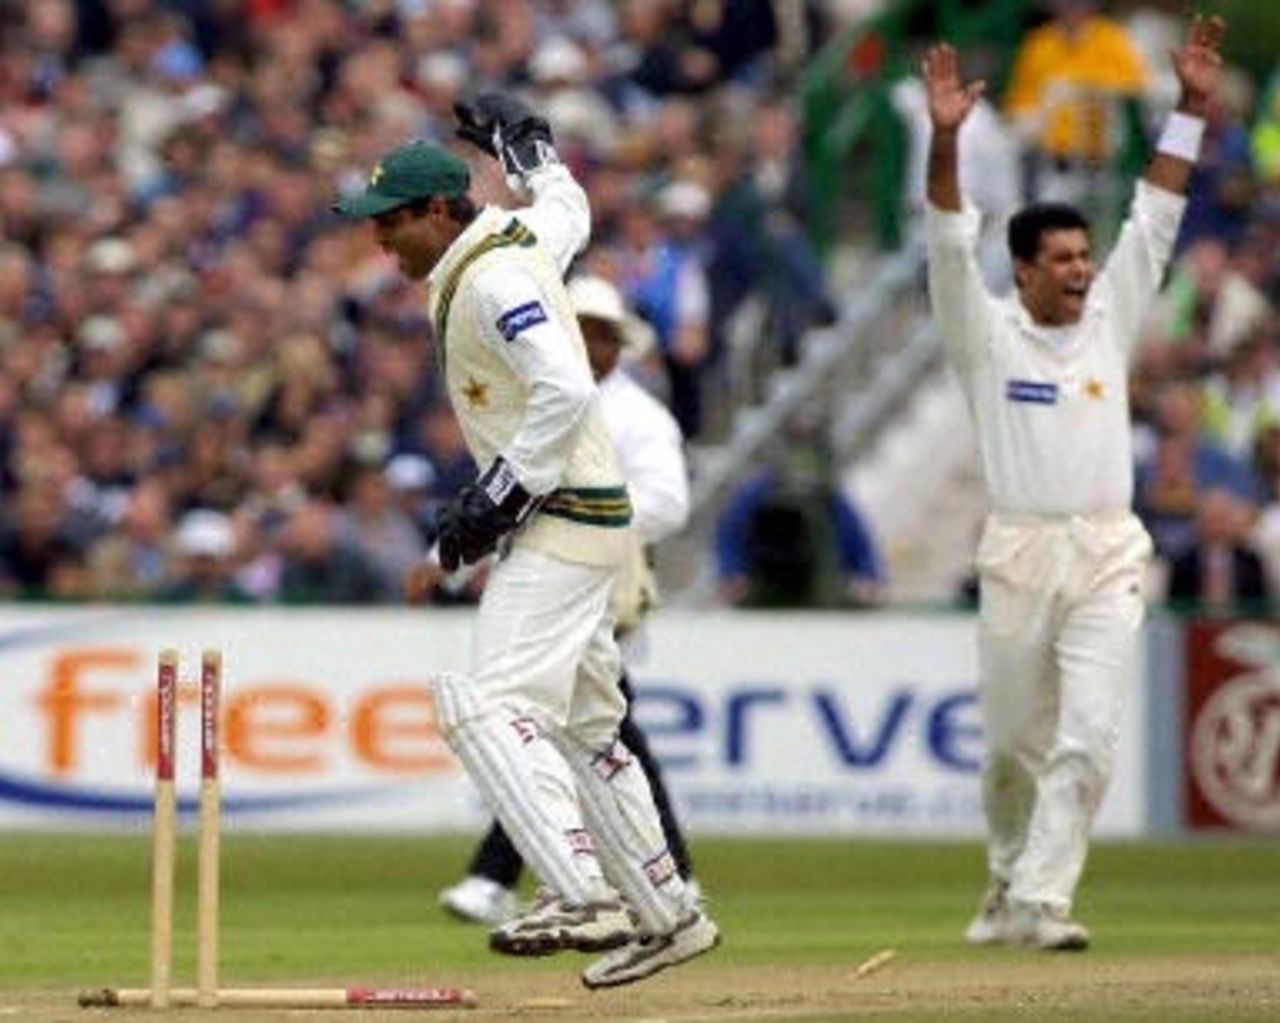 Waqar Younis and Rashid Latif celebrate the runout of Ian Ward, day 3, 2nd Test at Old Trafford, 17-21 May 2001.